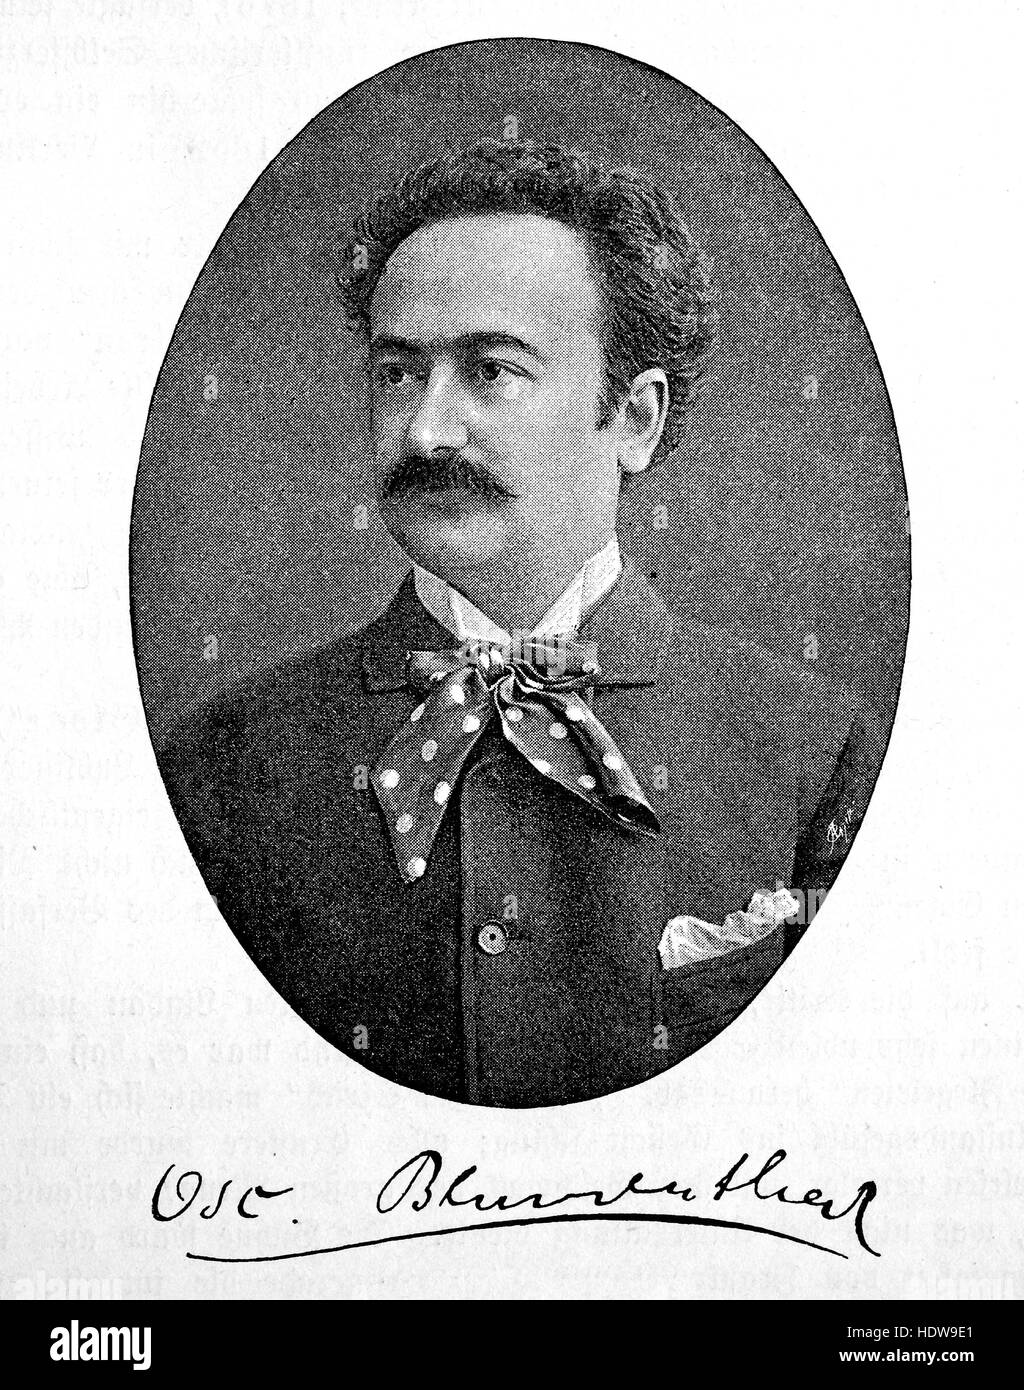 Oscar Blumenthal or Oskar Blumenthal, 1852-1917, German playwright and drama critic, woodcut from the year 1880 Stock Photo